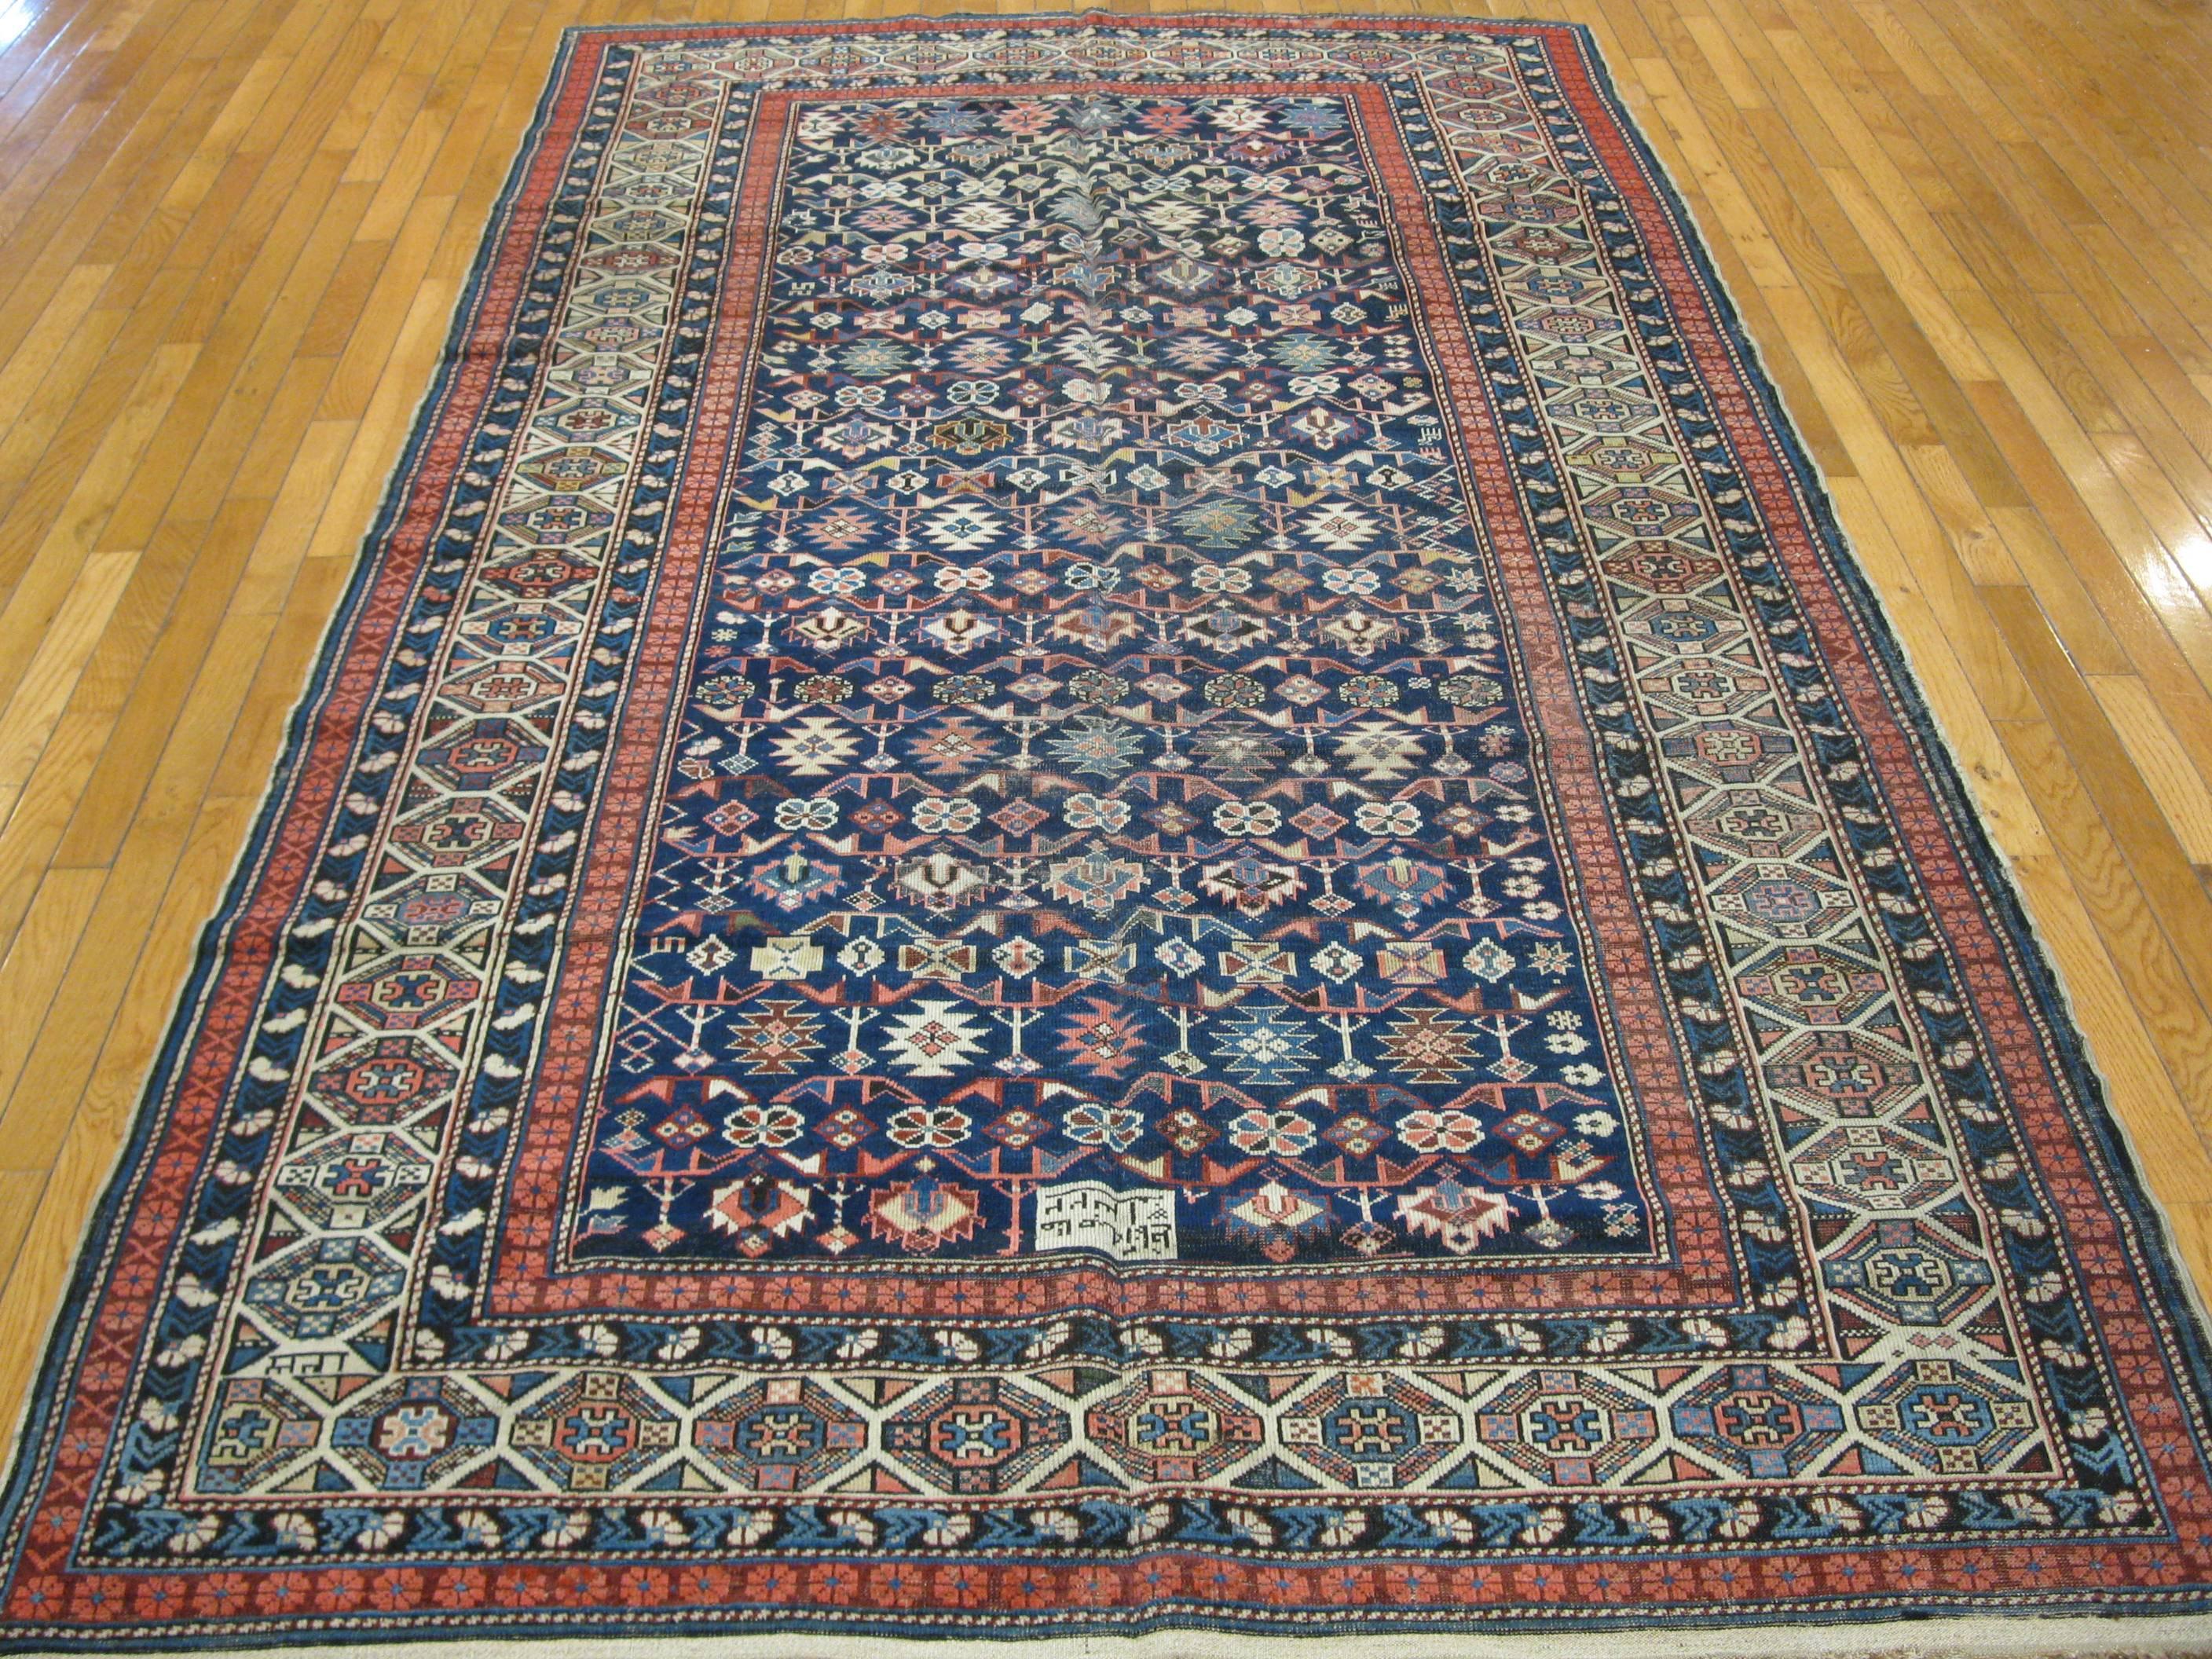 This is a fabulous antique hand-knotted Caucasian Shirvan rug. It has an all-over small scale repetitive geometric pattern wrapped around with a multi band border. The rug measures 5' x 8' 7'' . It is dated 1322 in Islamic calendar which make it